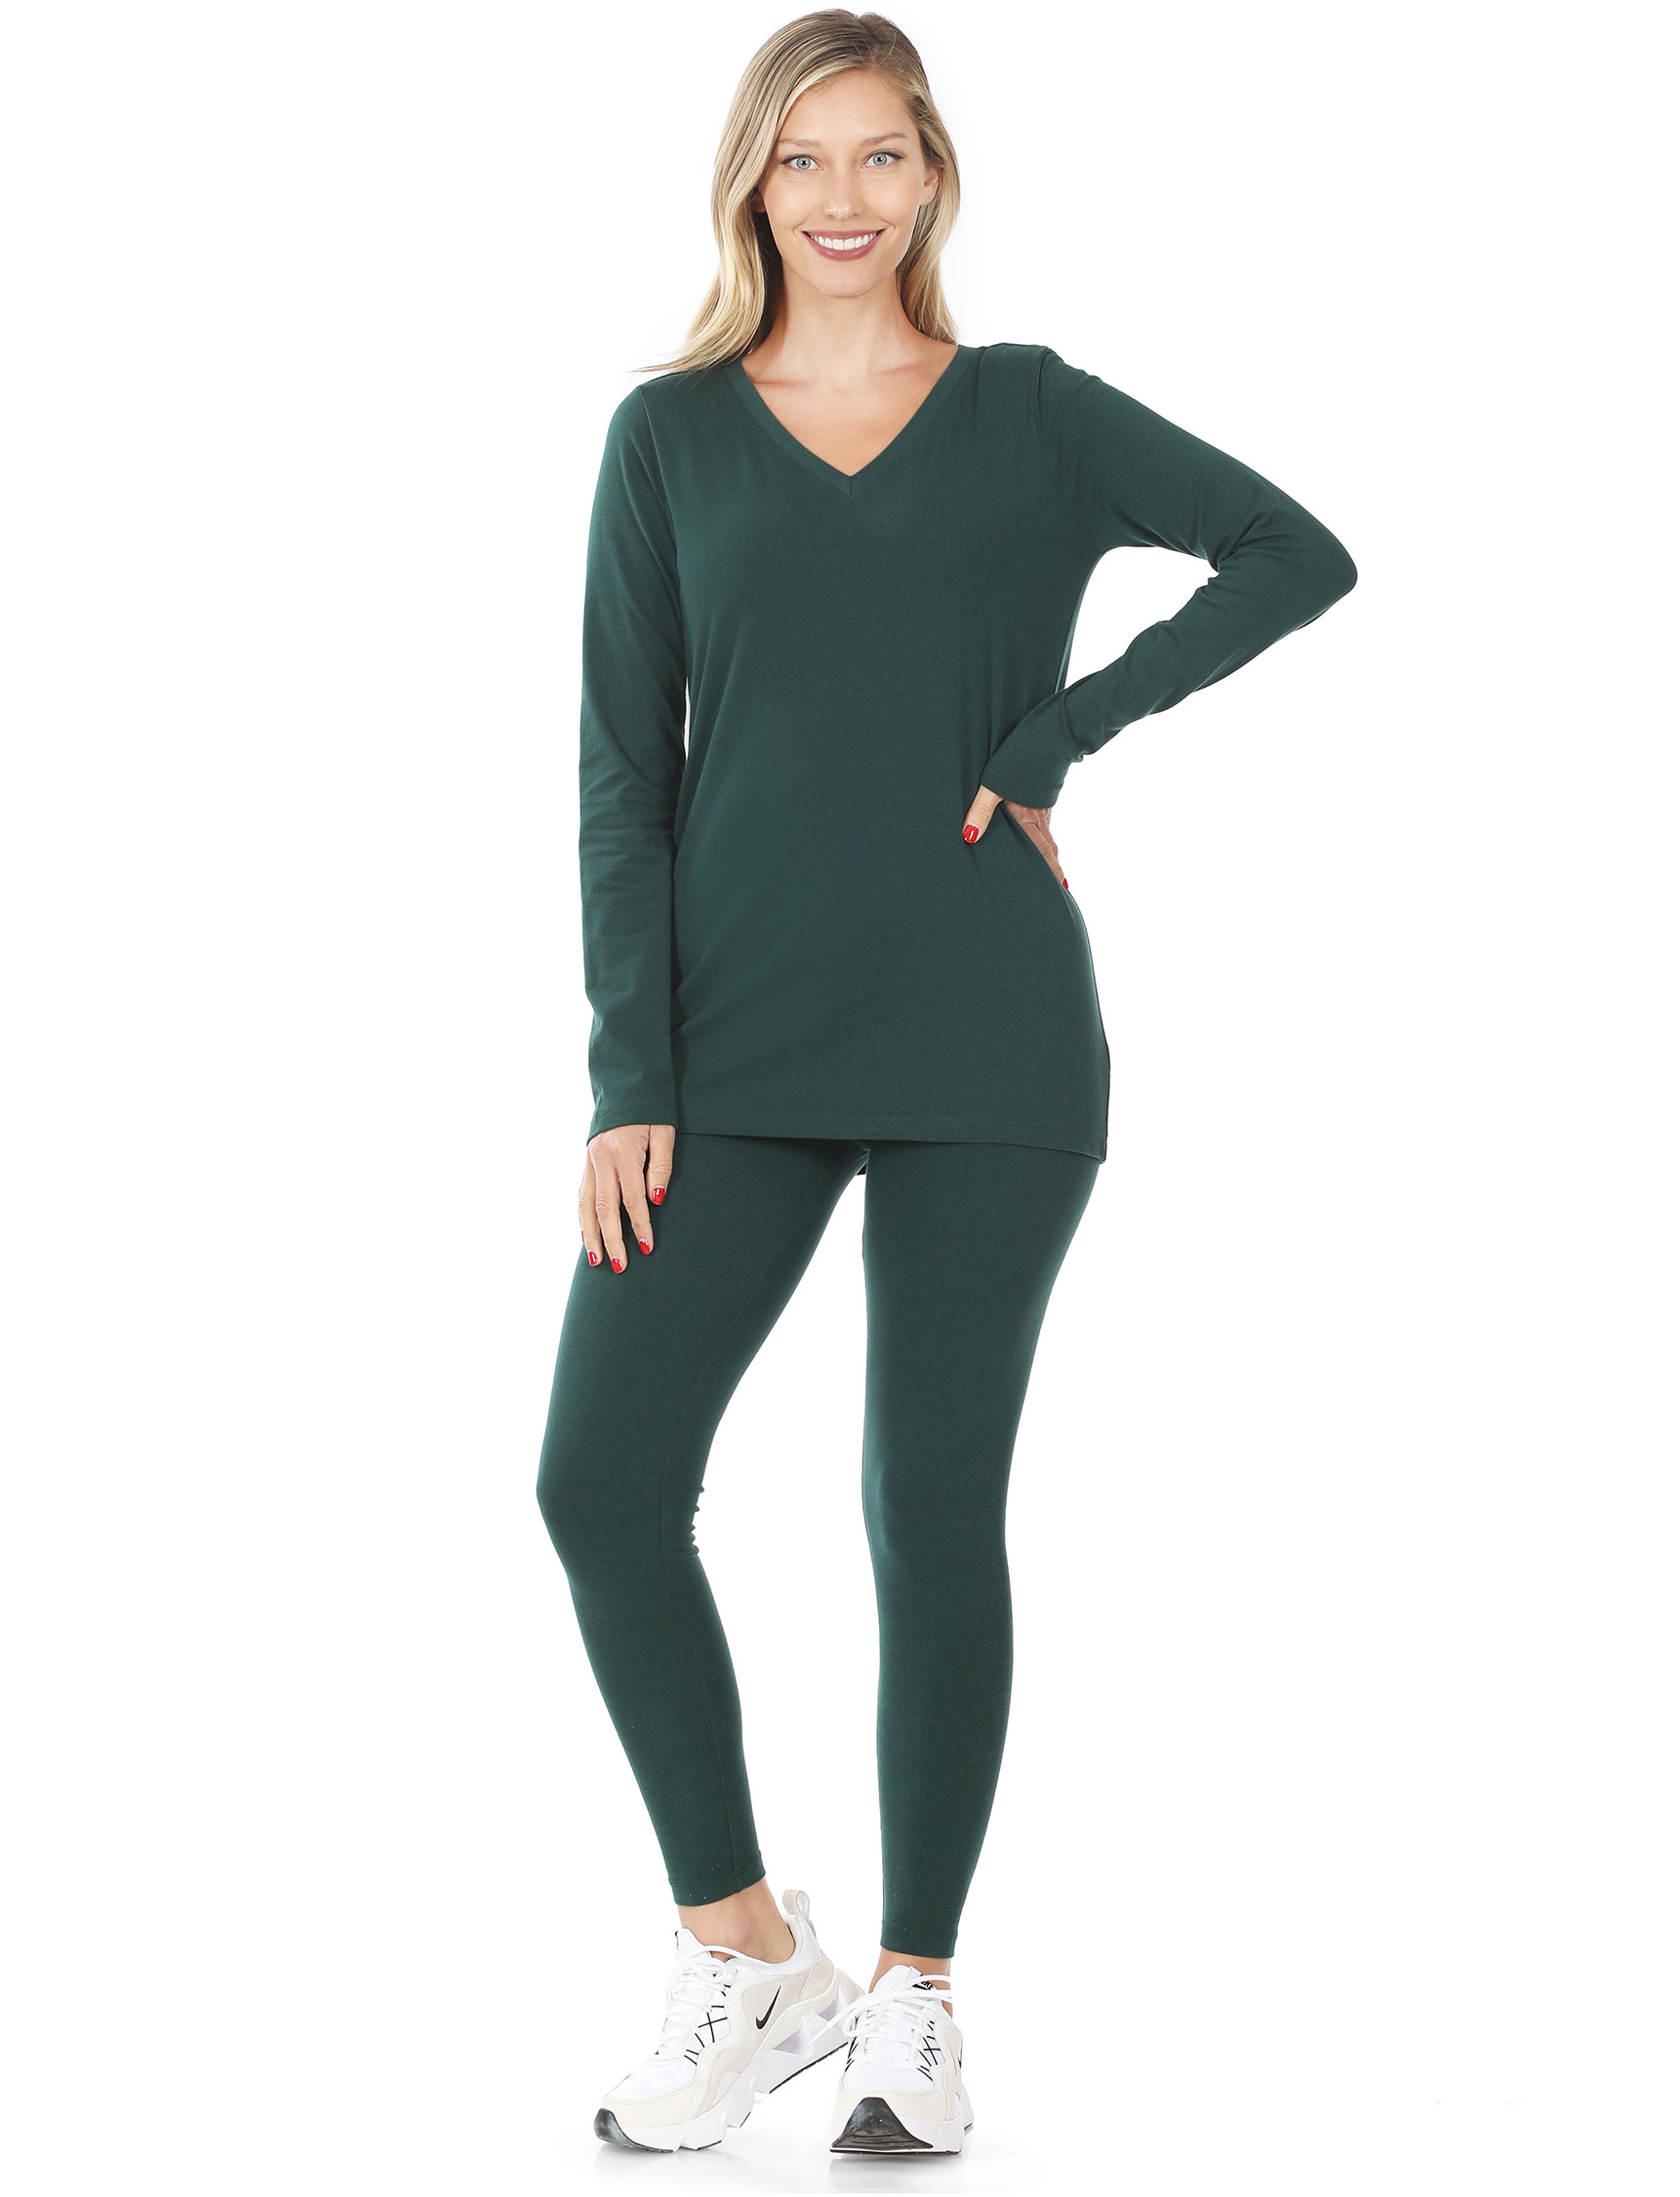 Leggings Wholesale Suppliers In India  International Society of Precision  Agriculture